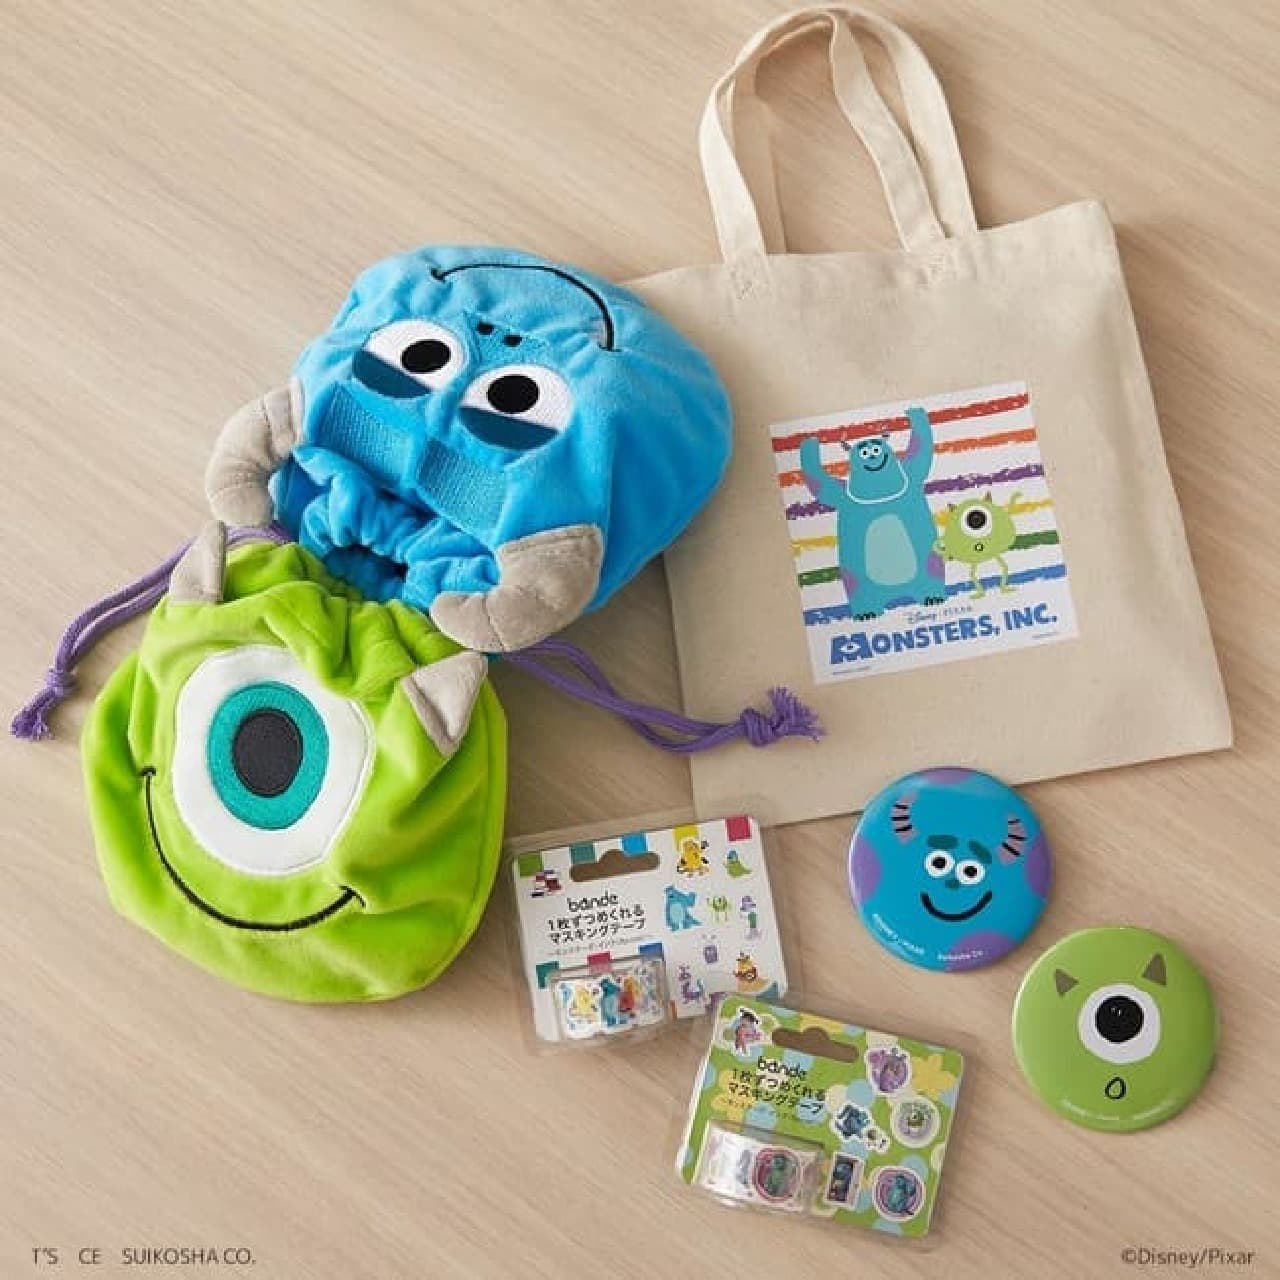 "Monsters, Inc." TSUTAYA limited product --Maste tote that can be used by parents and children! Present campaign